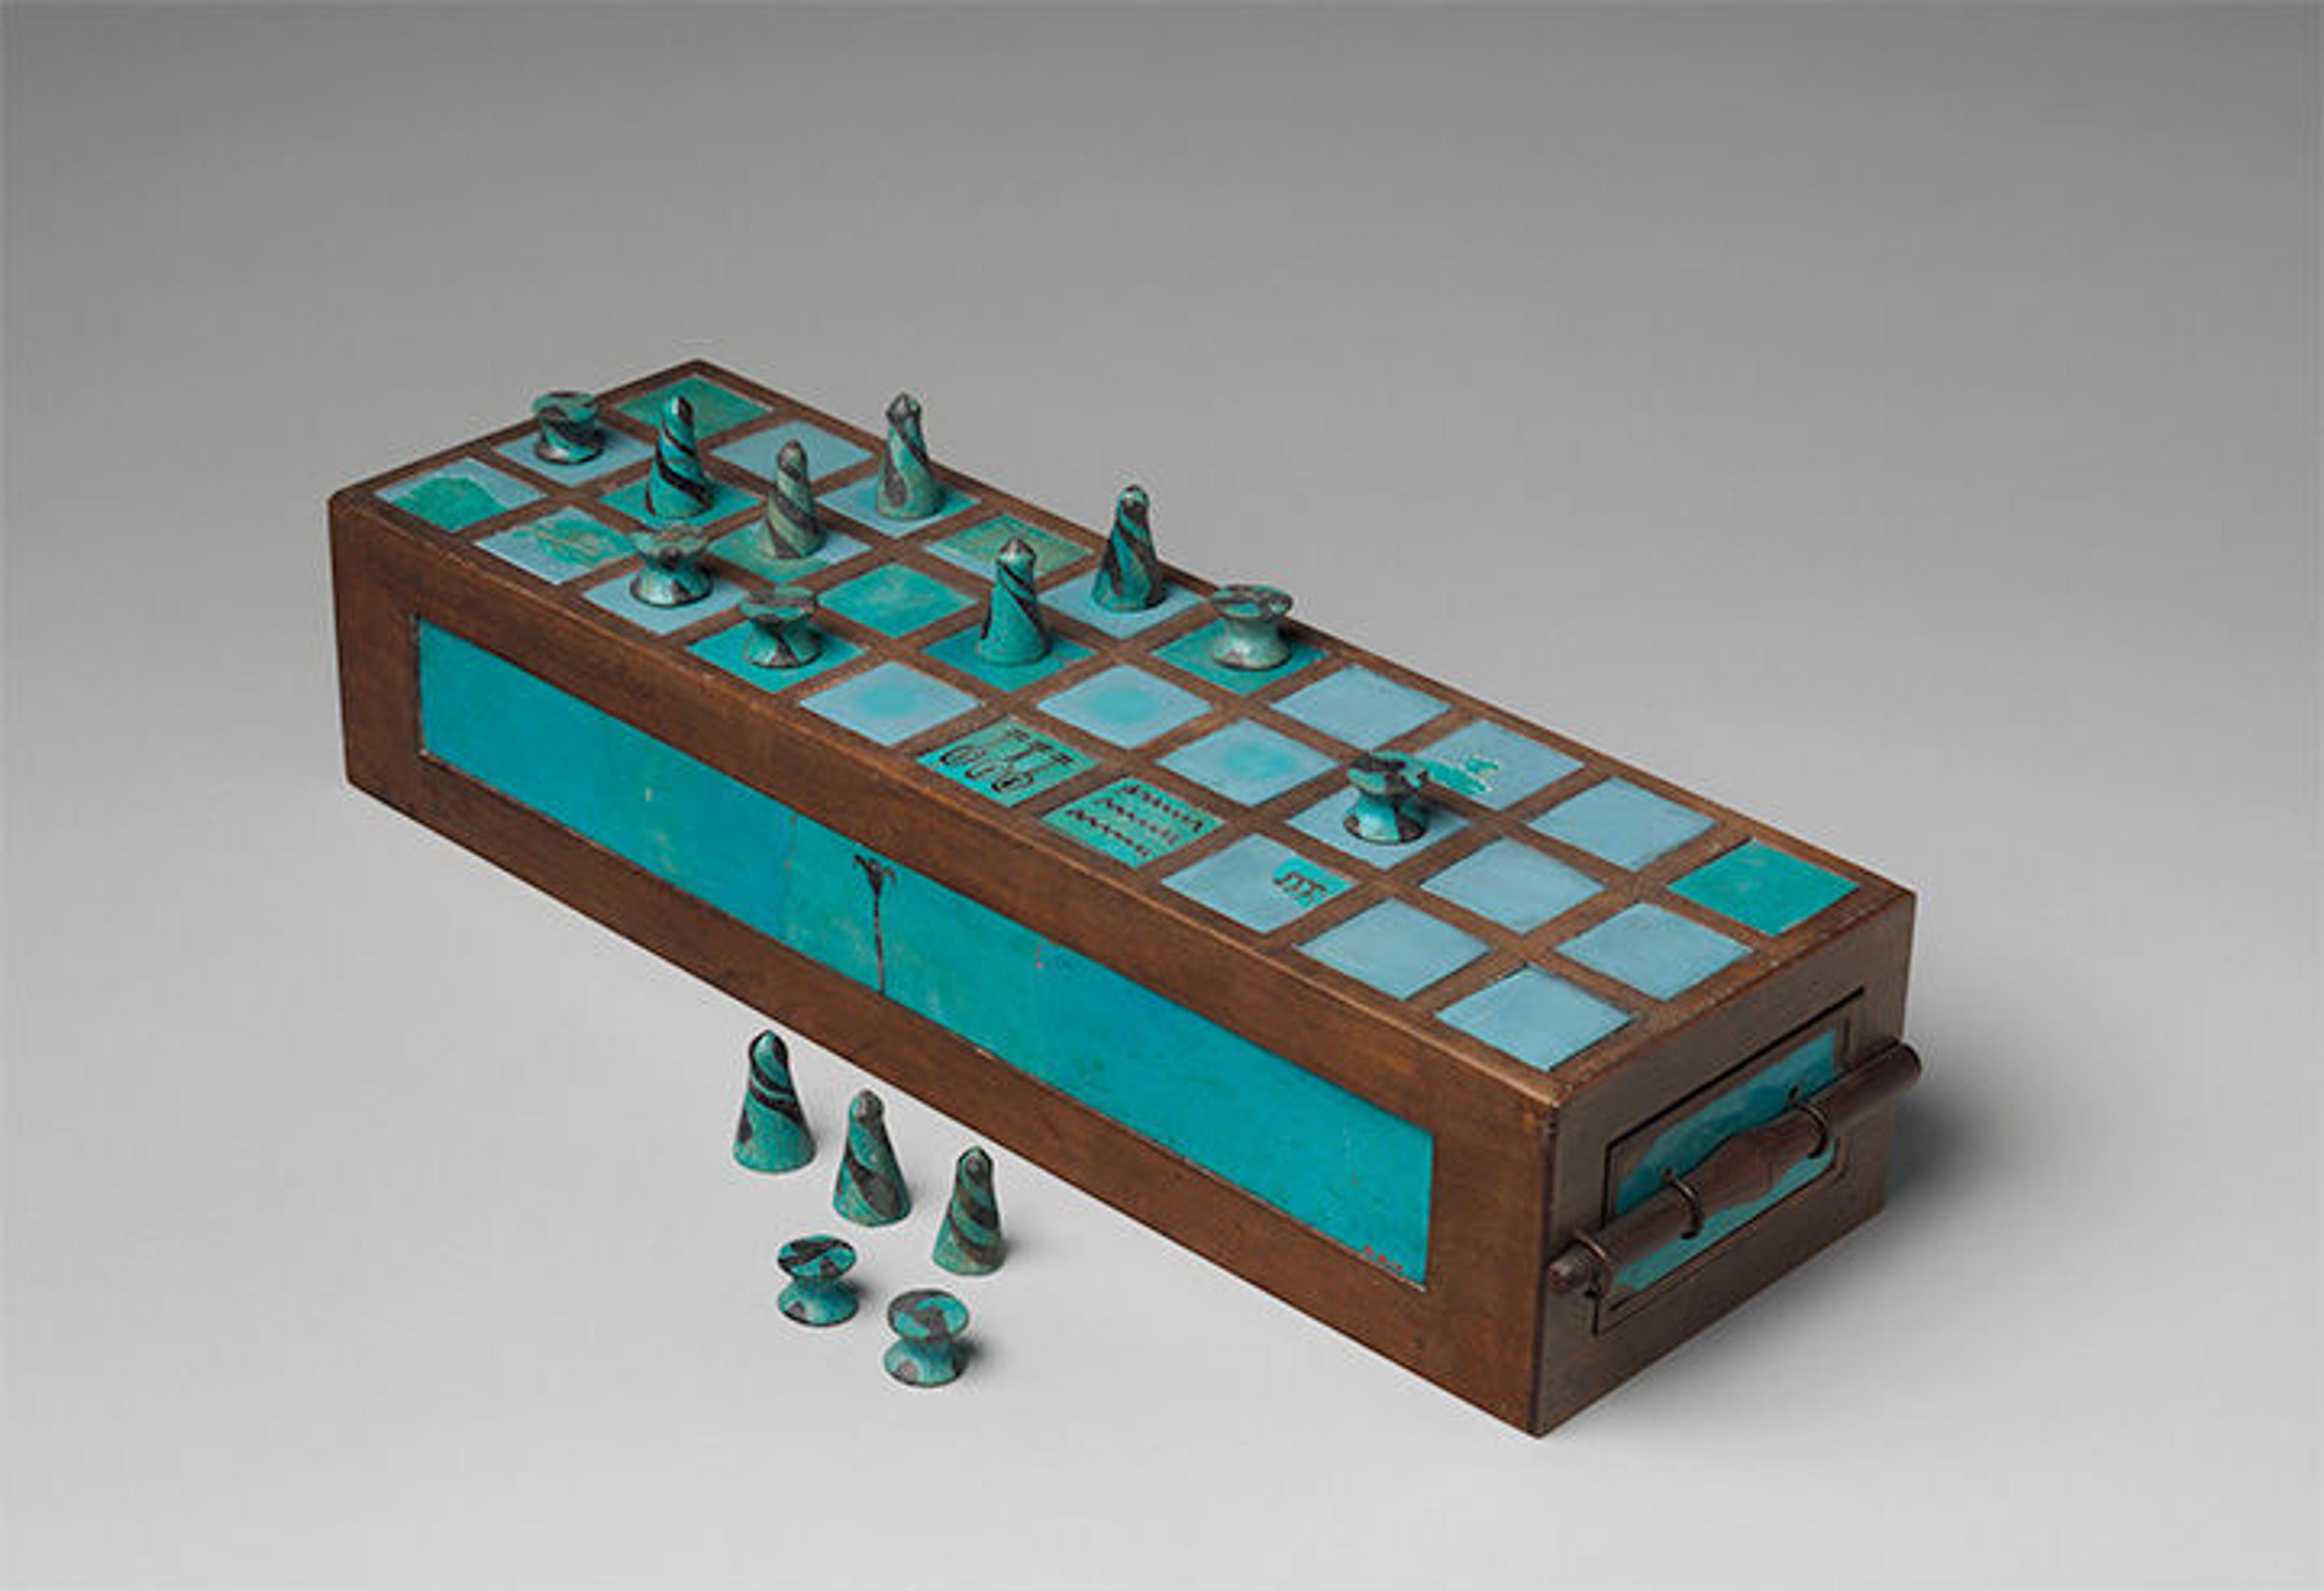 Senet game board and pieces